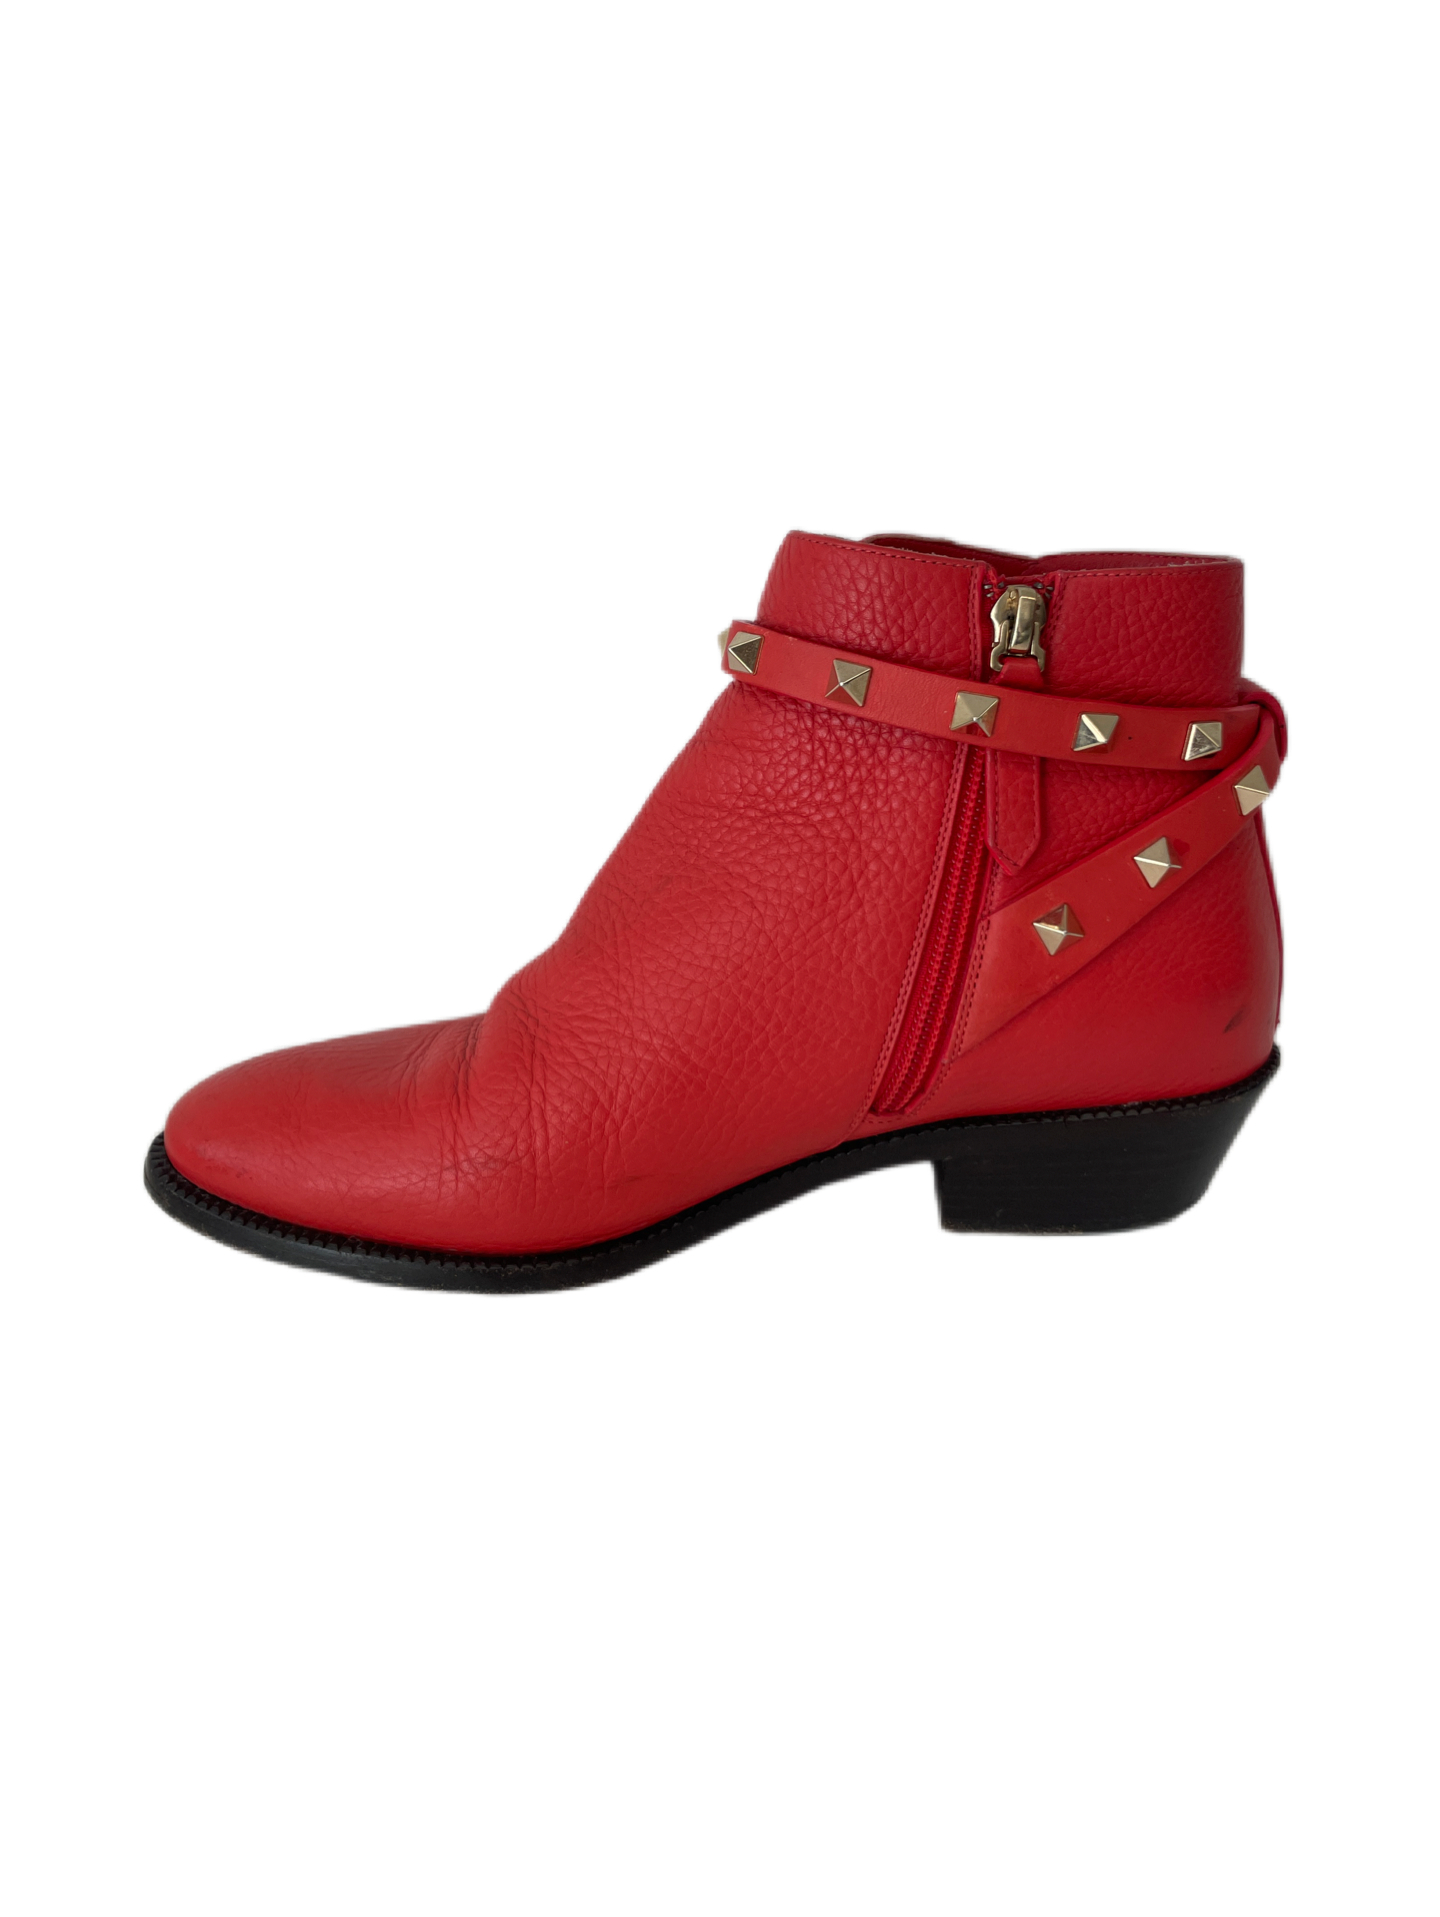 Valentino Red Rockstud Boots. Size: 36.5